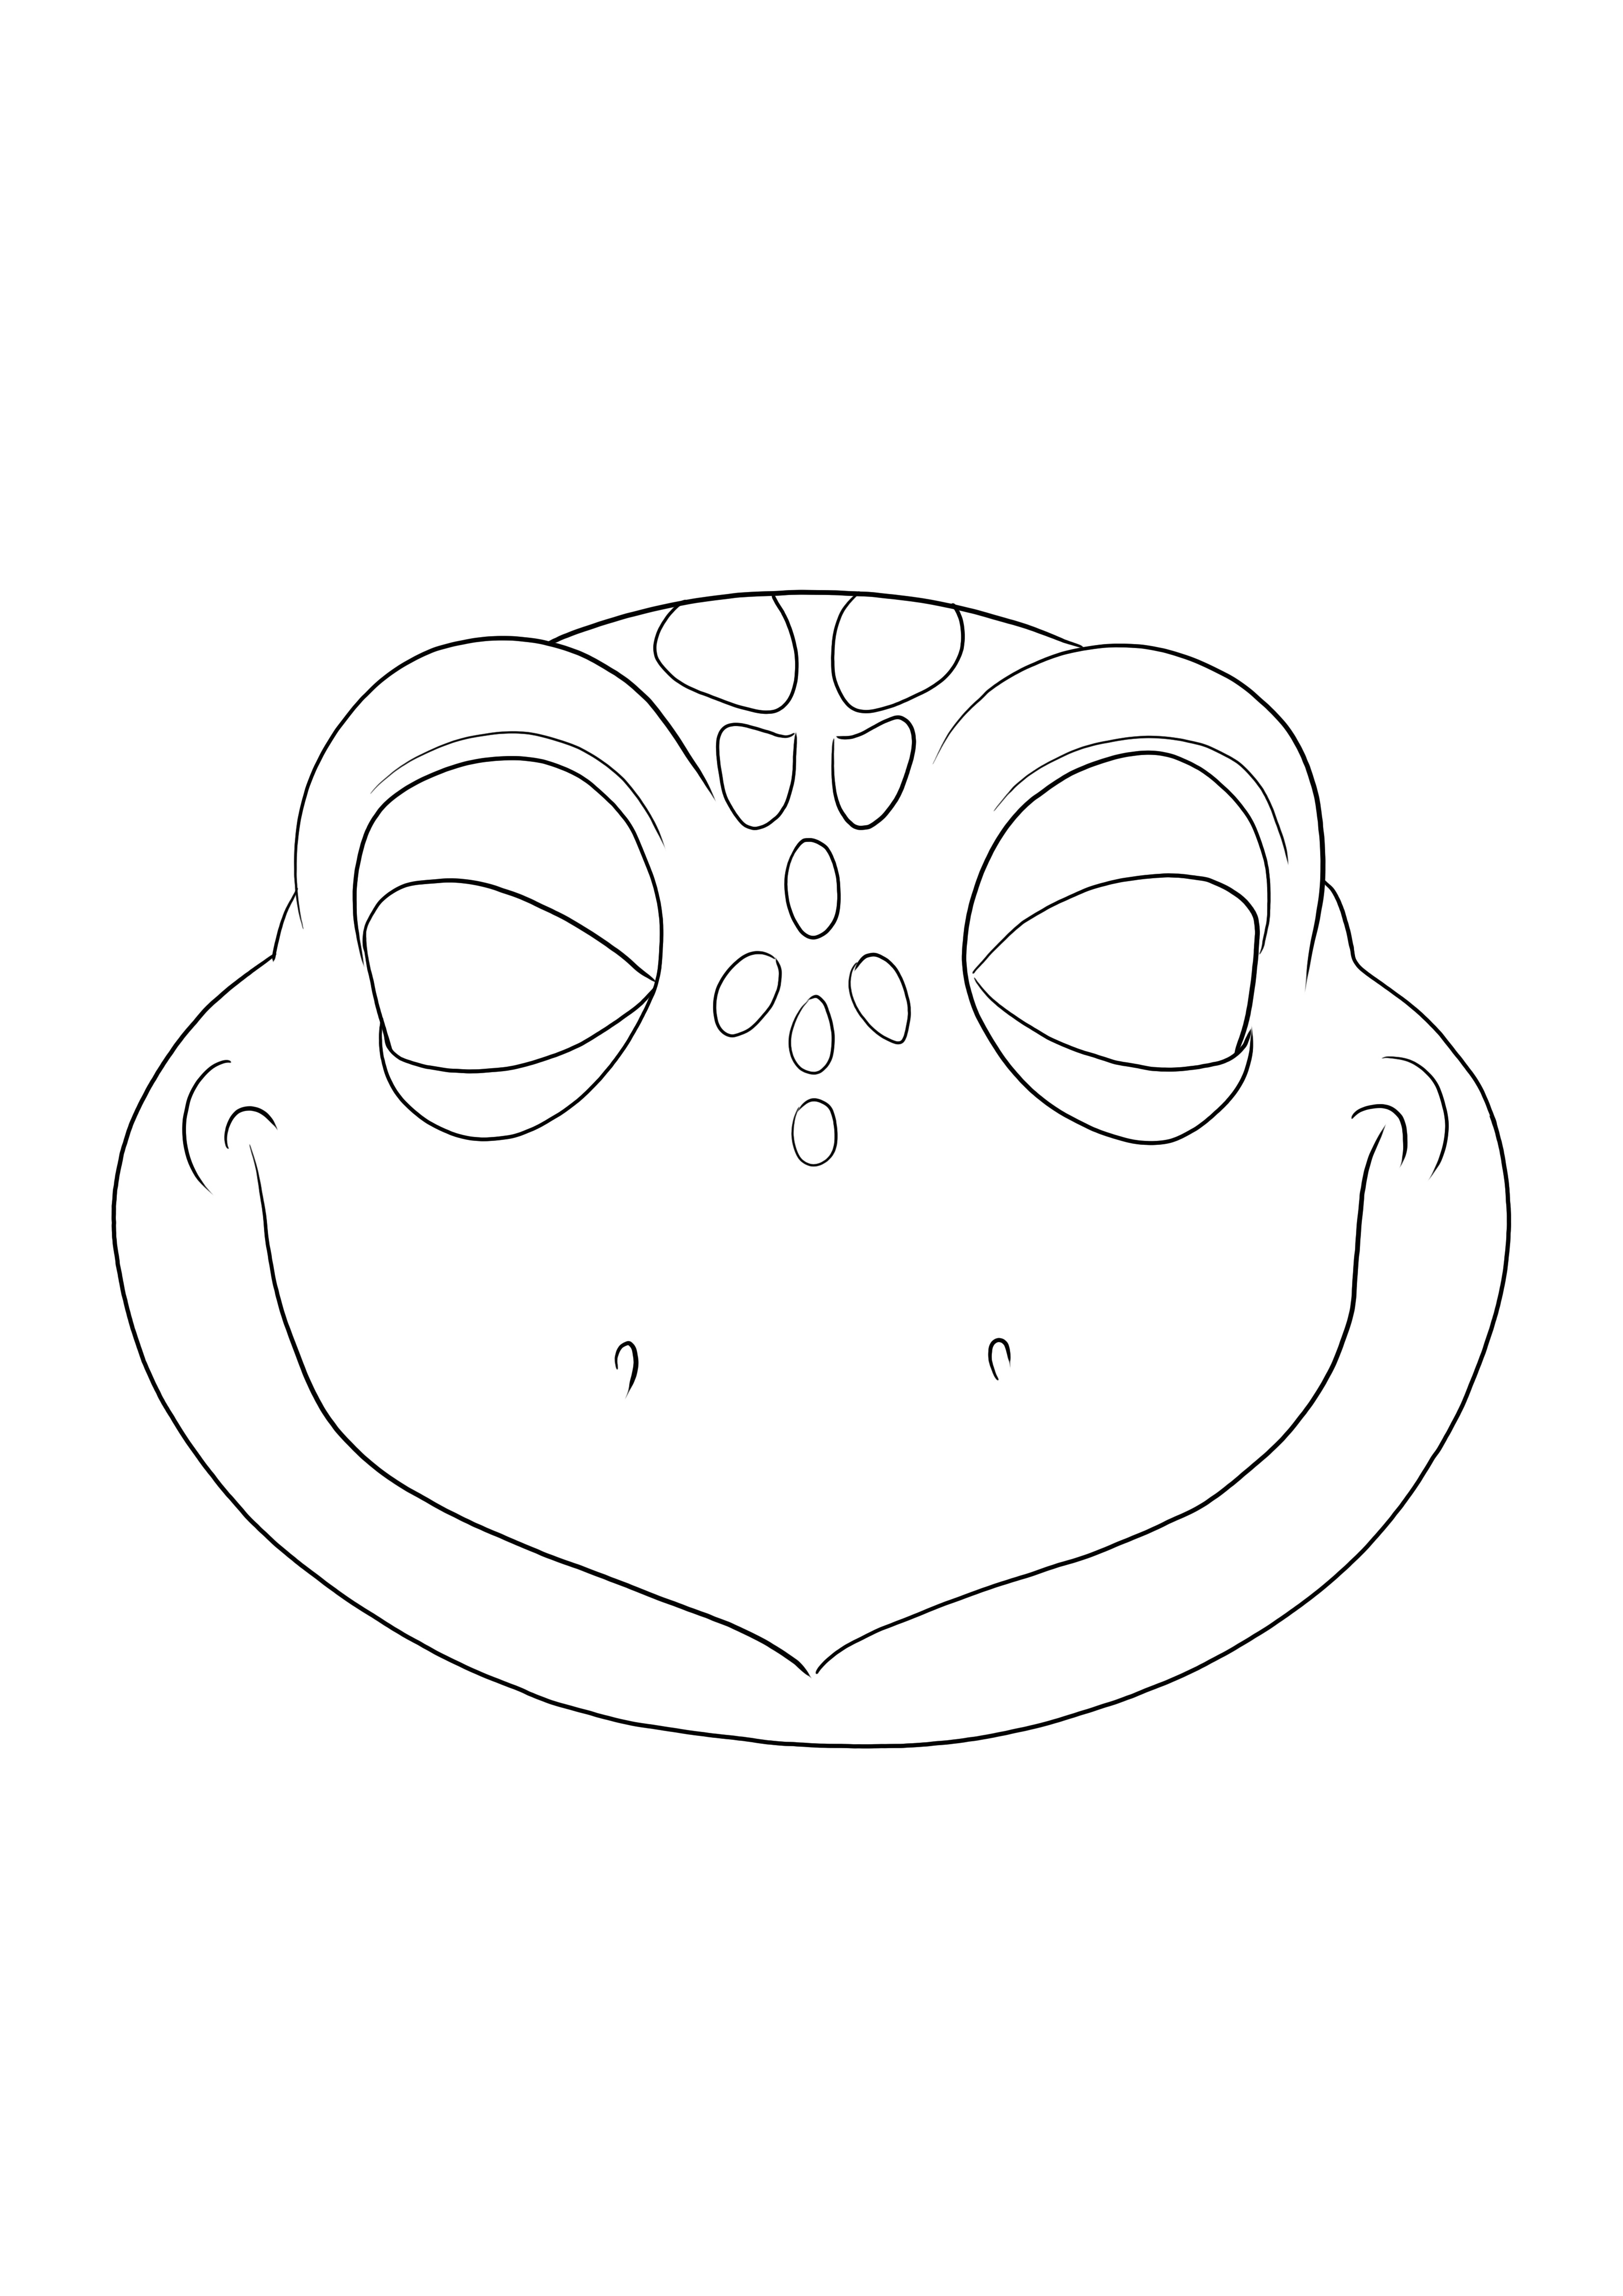 Simply coloring sheet of a Turtle Mask to print or download for free